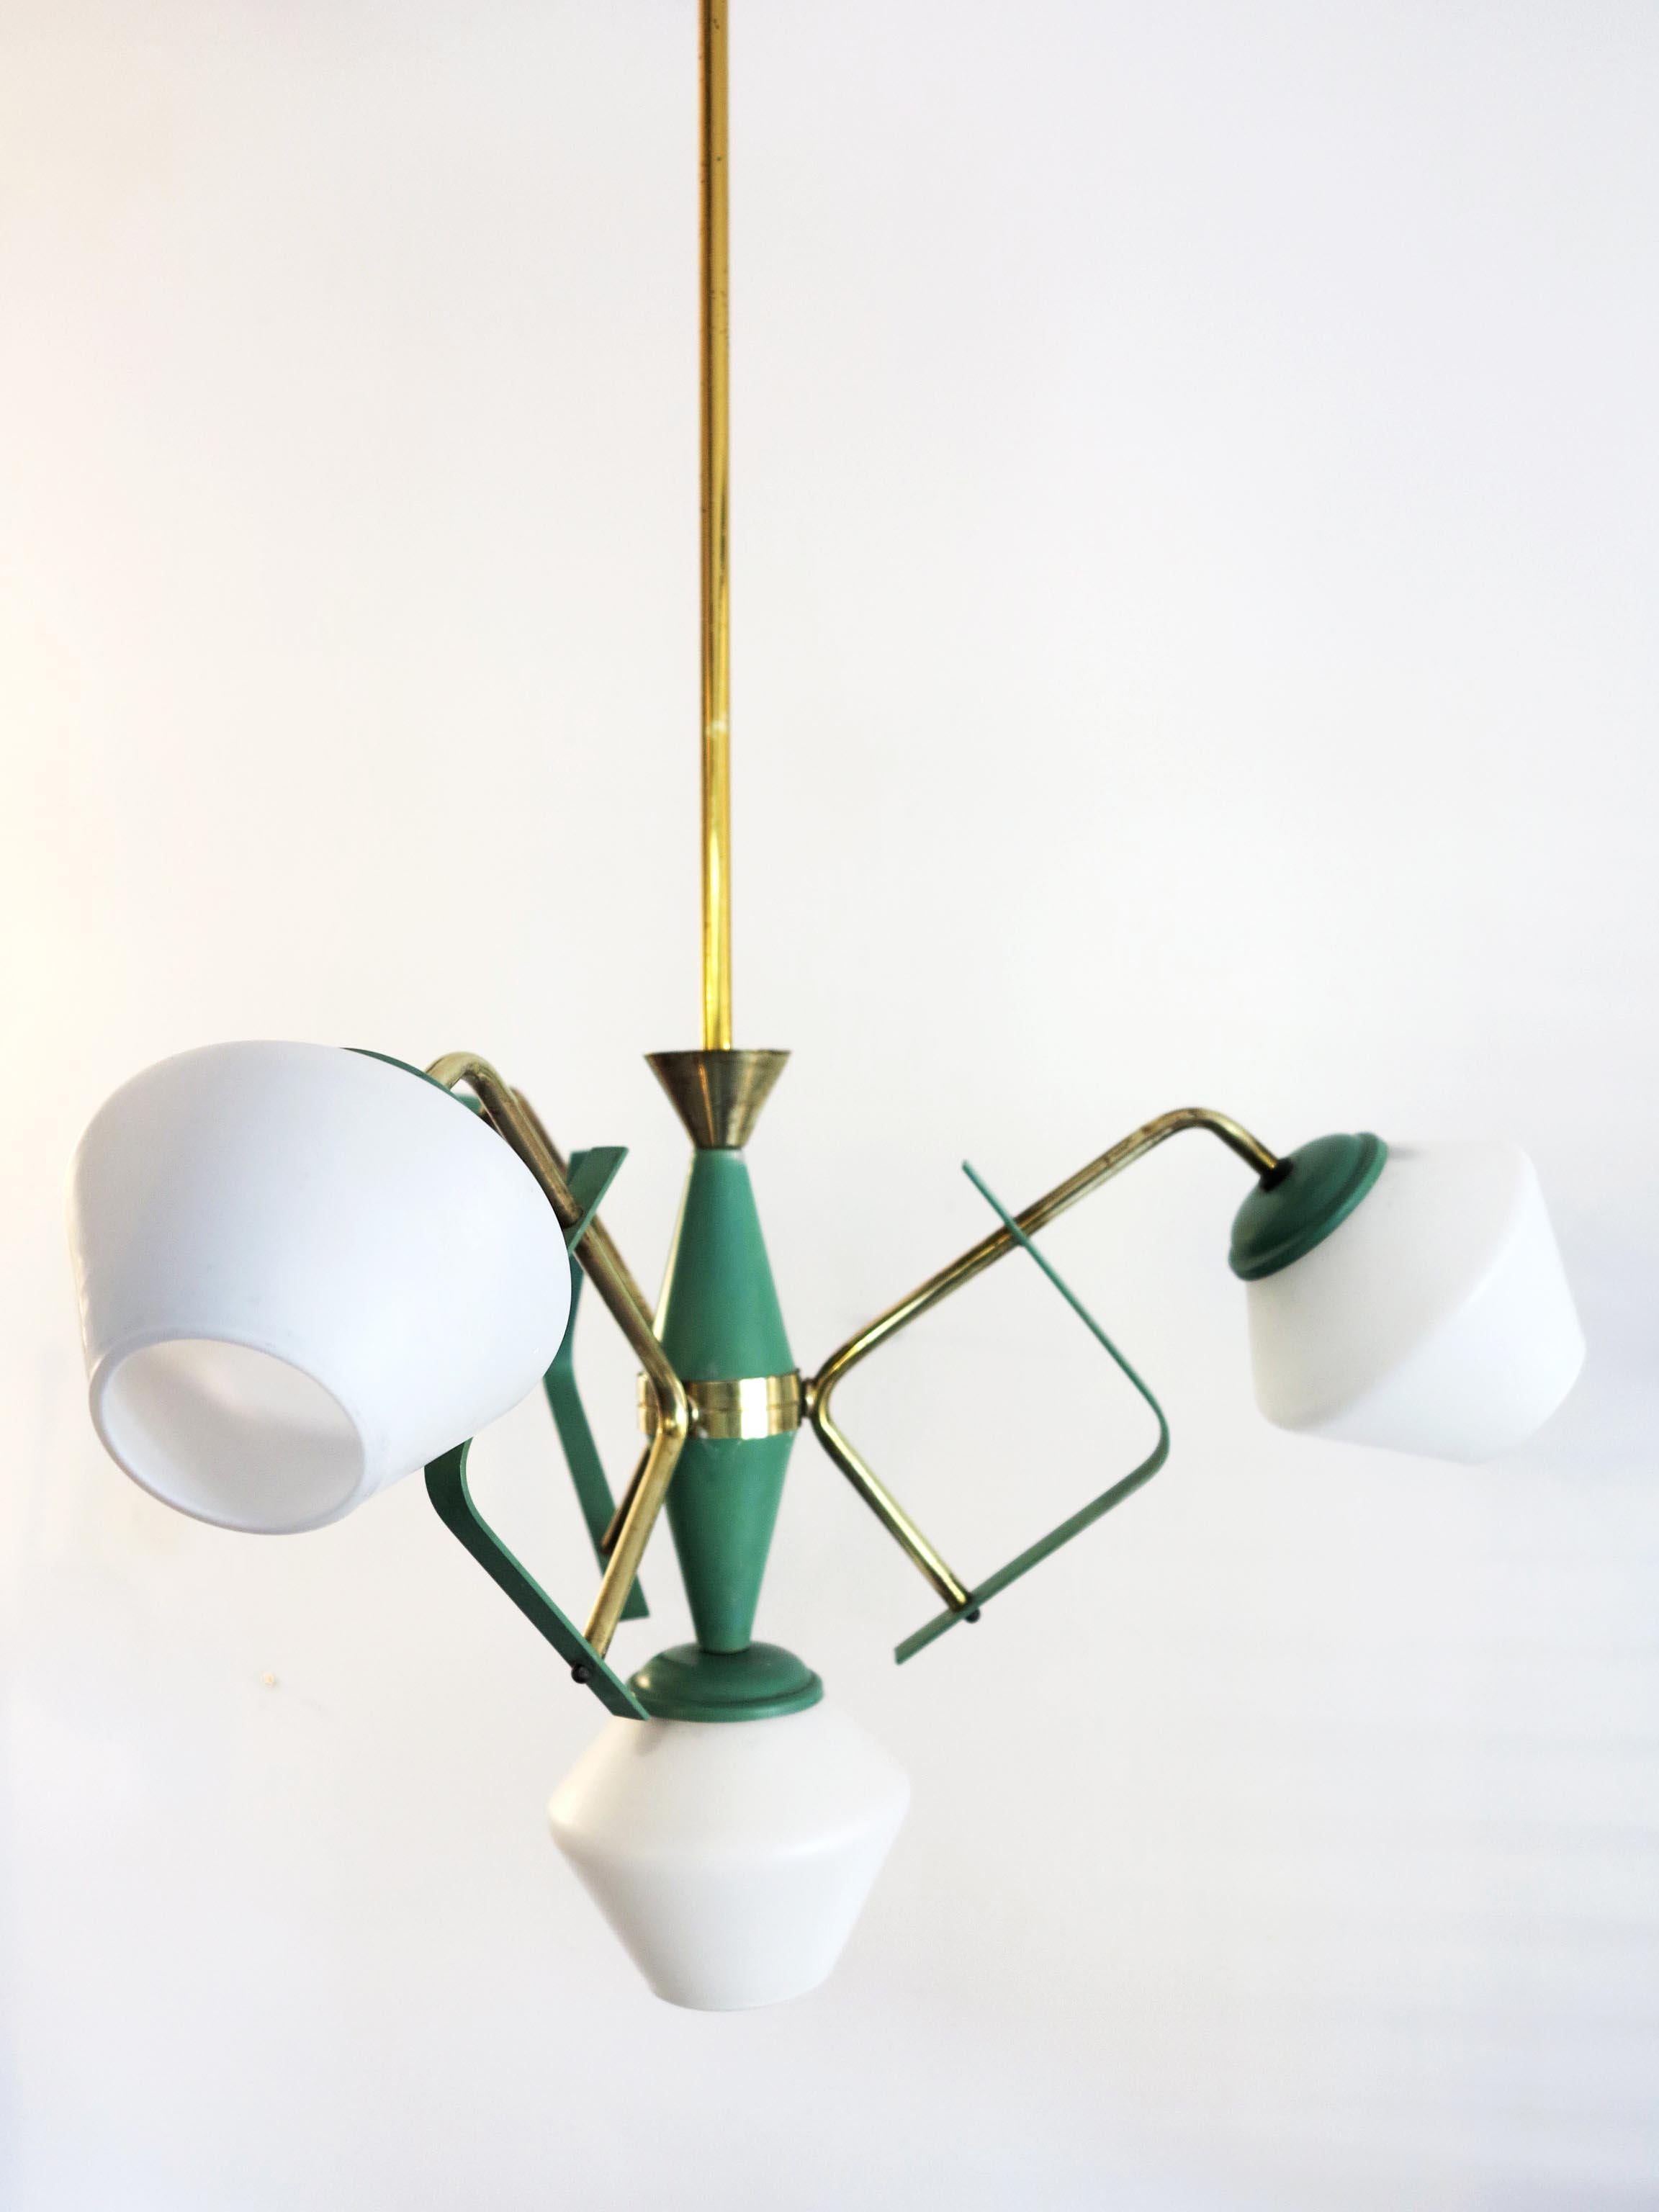 Italian ceiling lamp by Stilnovo in opaline glass with green and brass details.
The lamp presents four opaline glass, three lateral and one in the centre.
There are beautiful element in metal green painted with polished brass details.